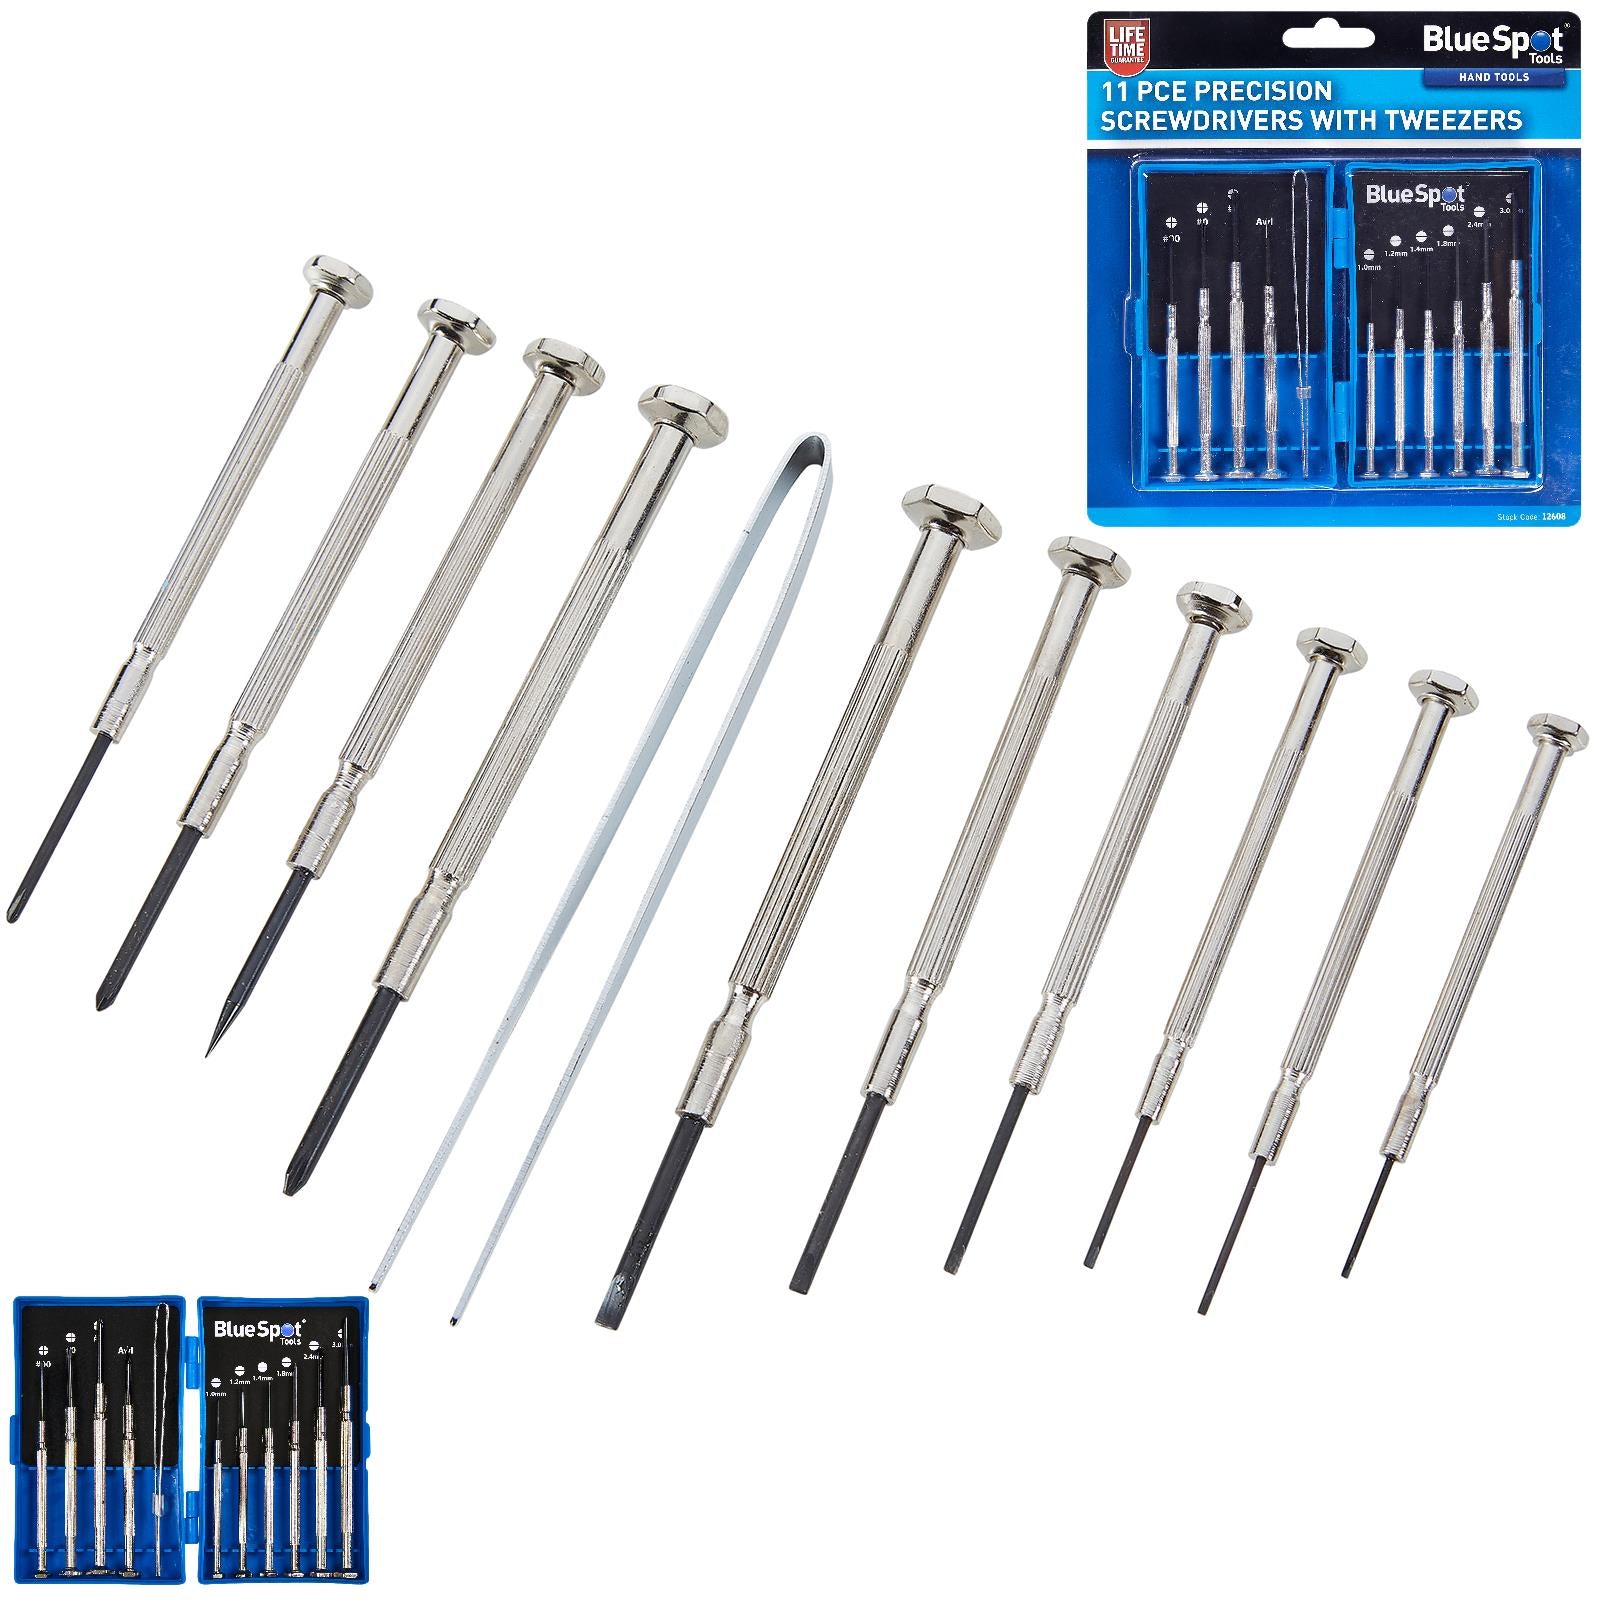 BlueSpot Precision Screwdriver Set with Tweezers 11 Piece Slotted Phillips